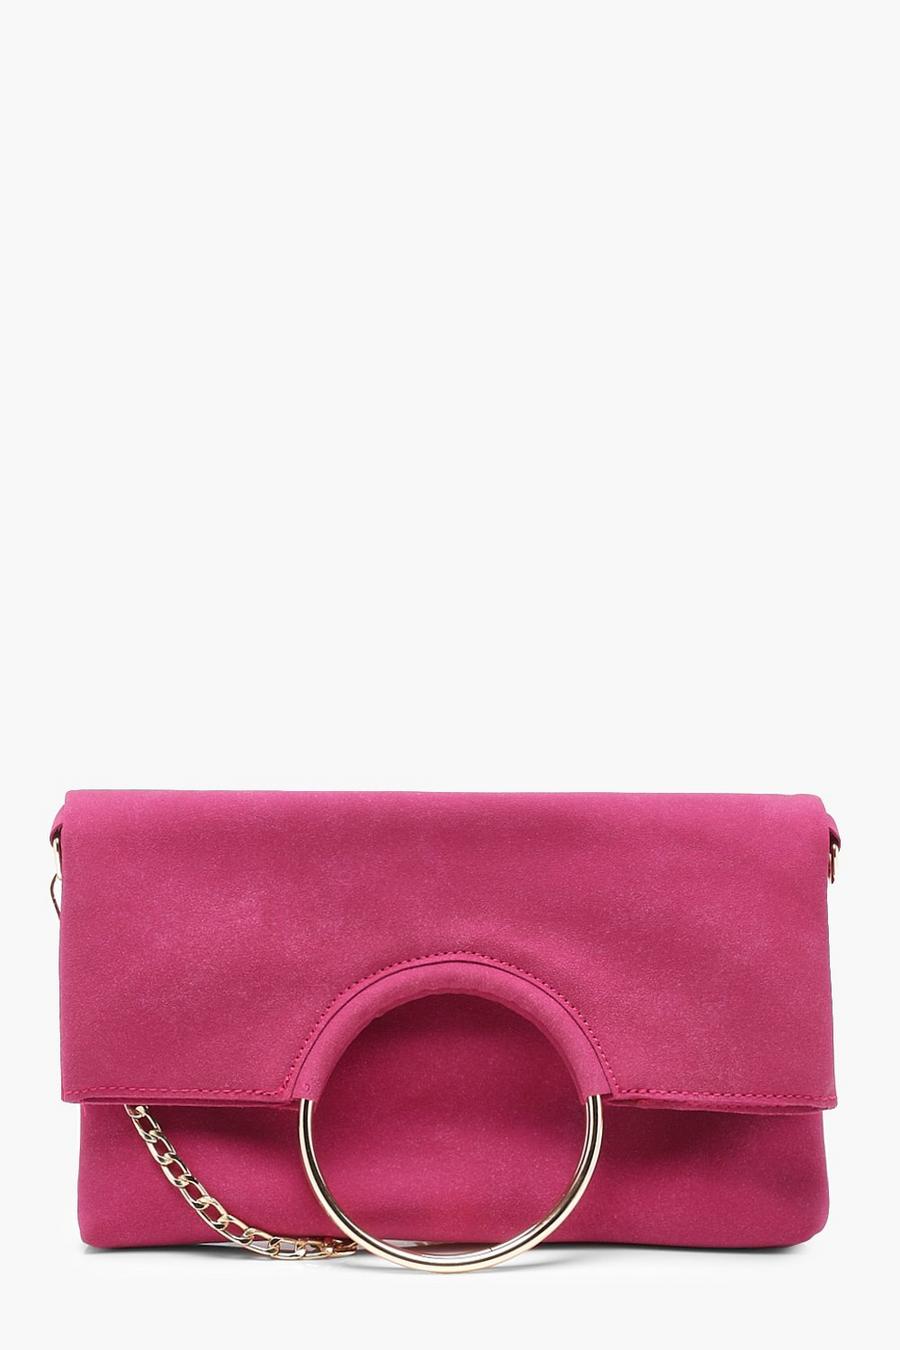 Tammi Foldover Ring Clutch With Chain, Bright pink image number 1